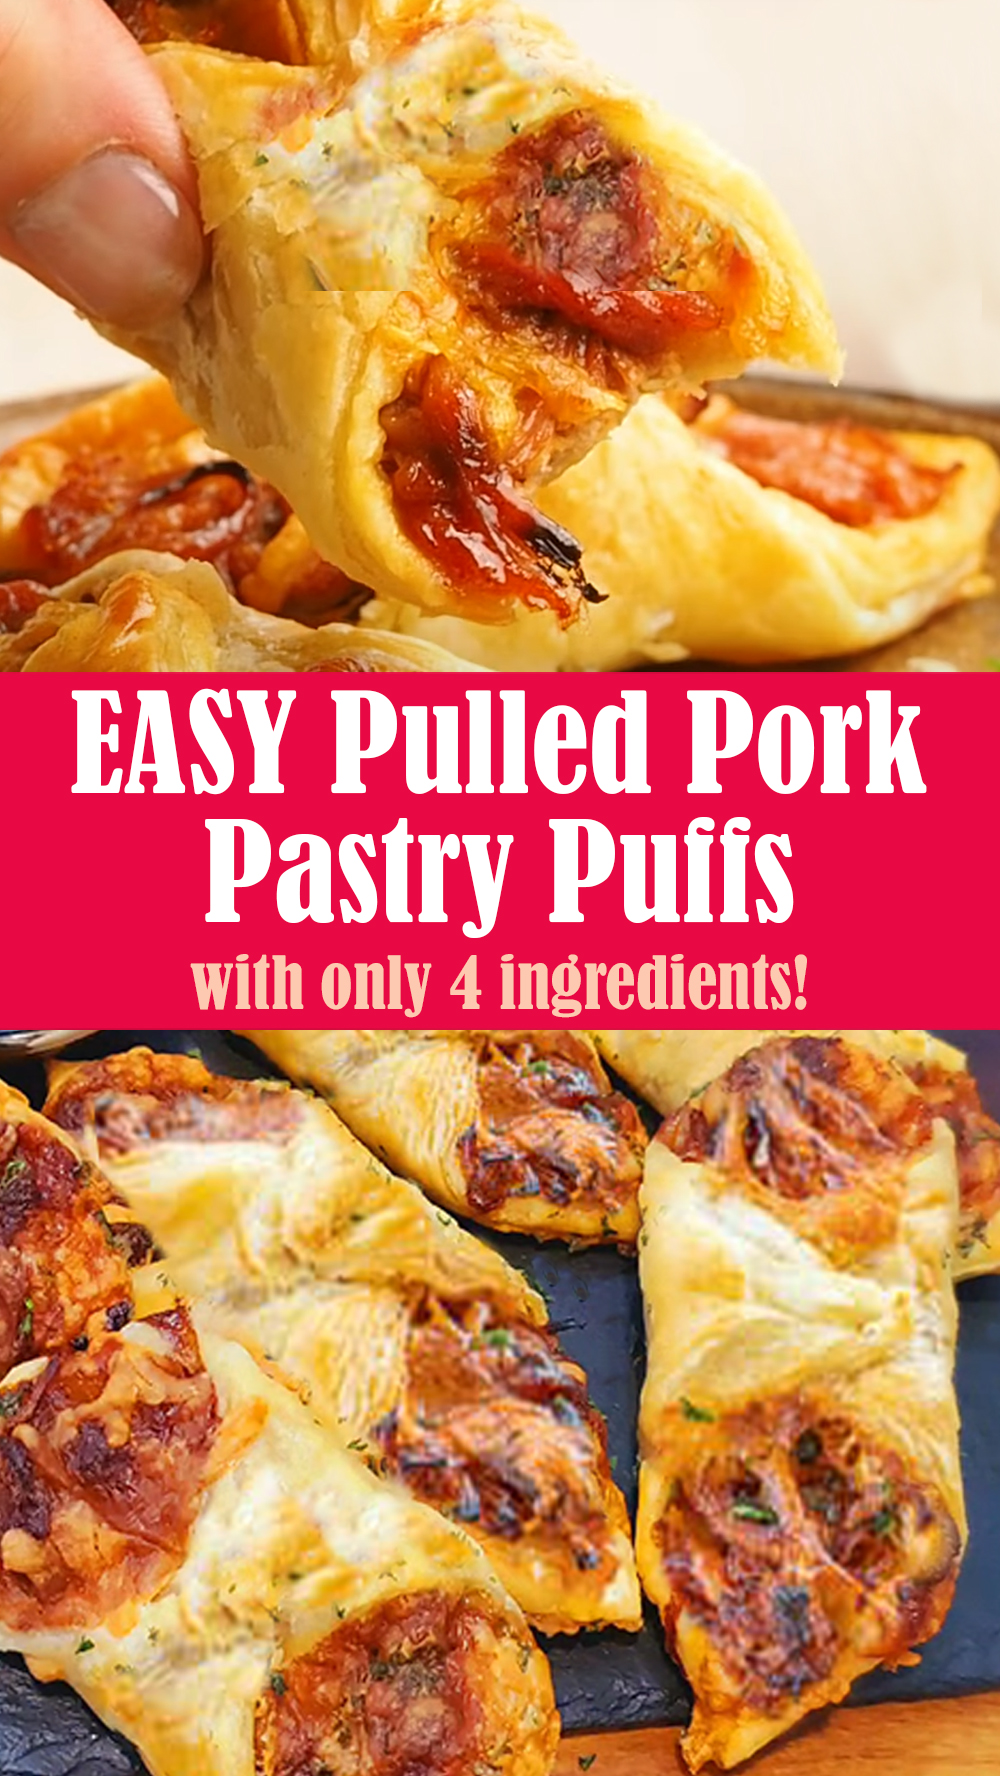 EASY Pulled Pork Pastry Puffs